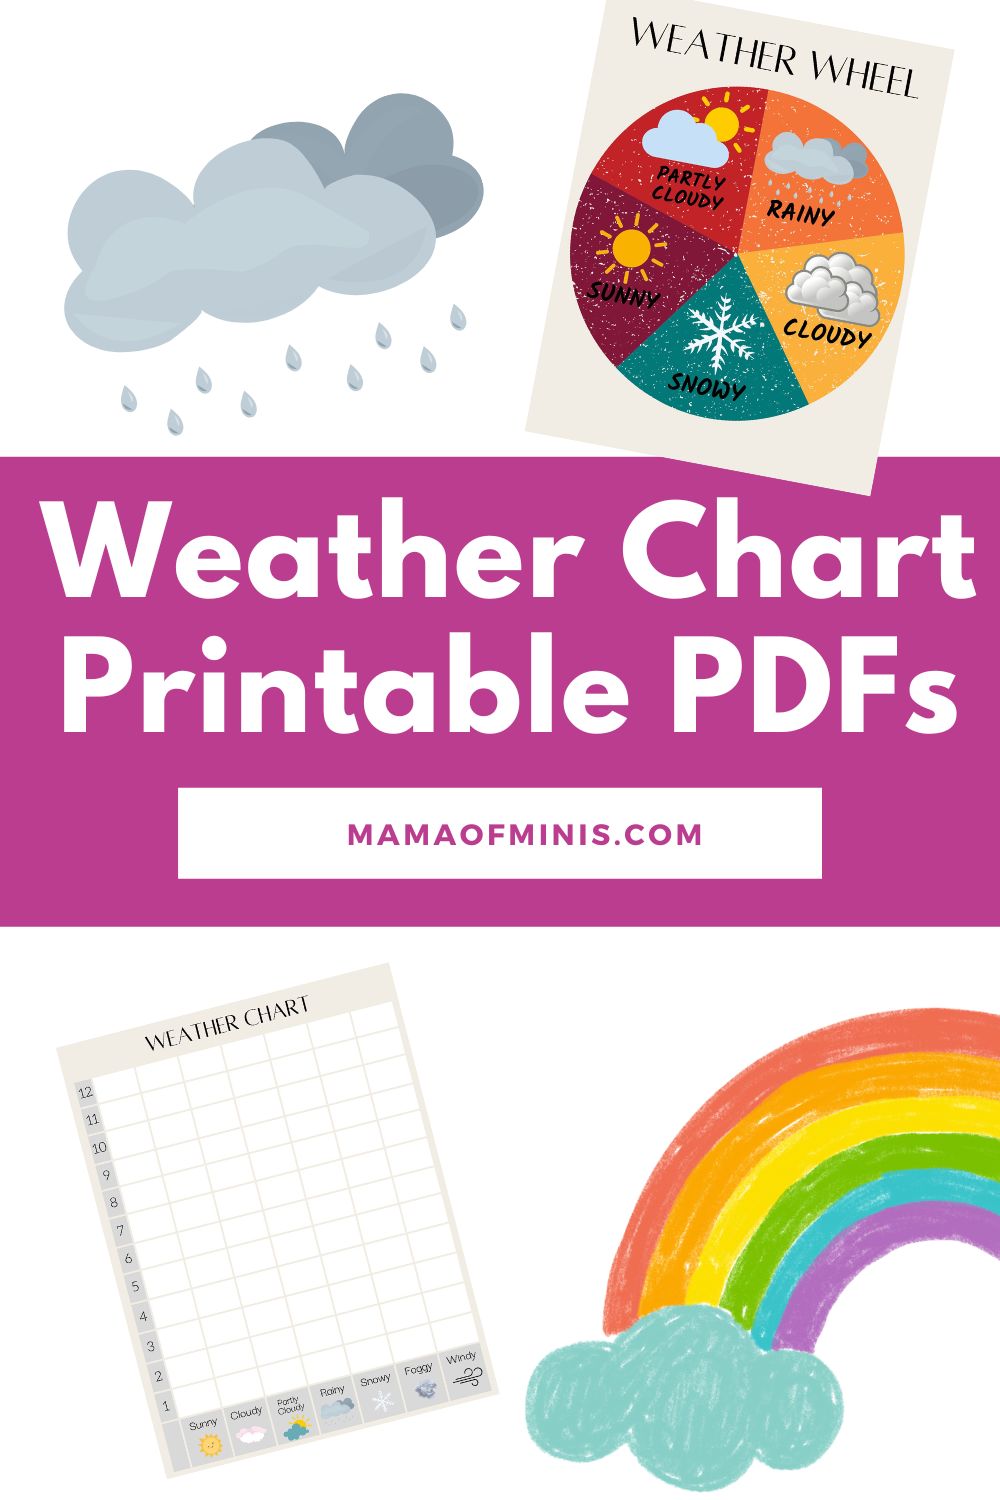 Weather Chart Printable PDFs